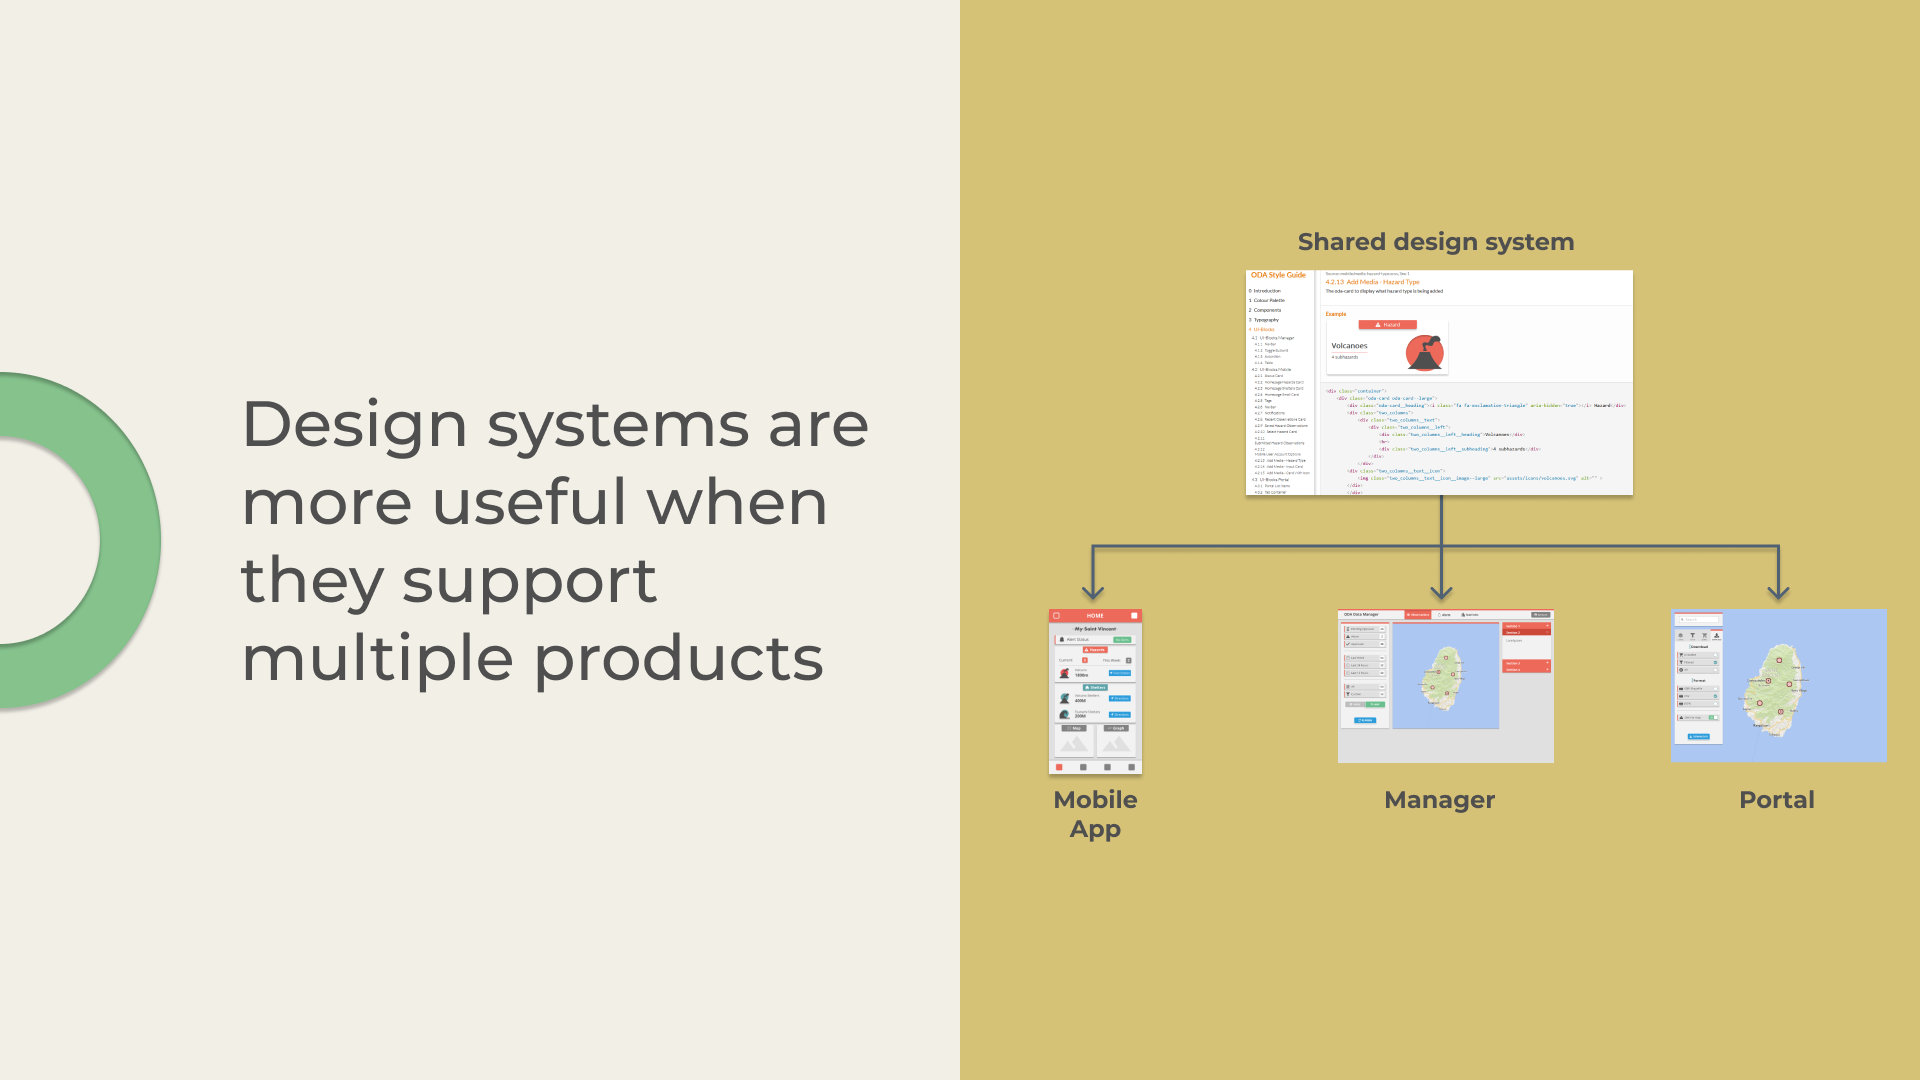 Three different applications relying on a shared design system